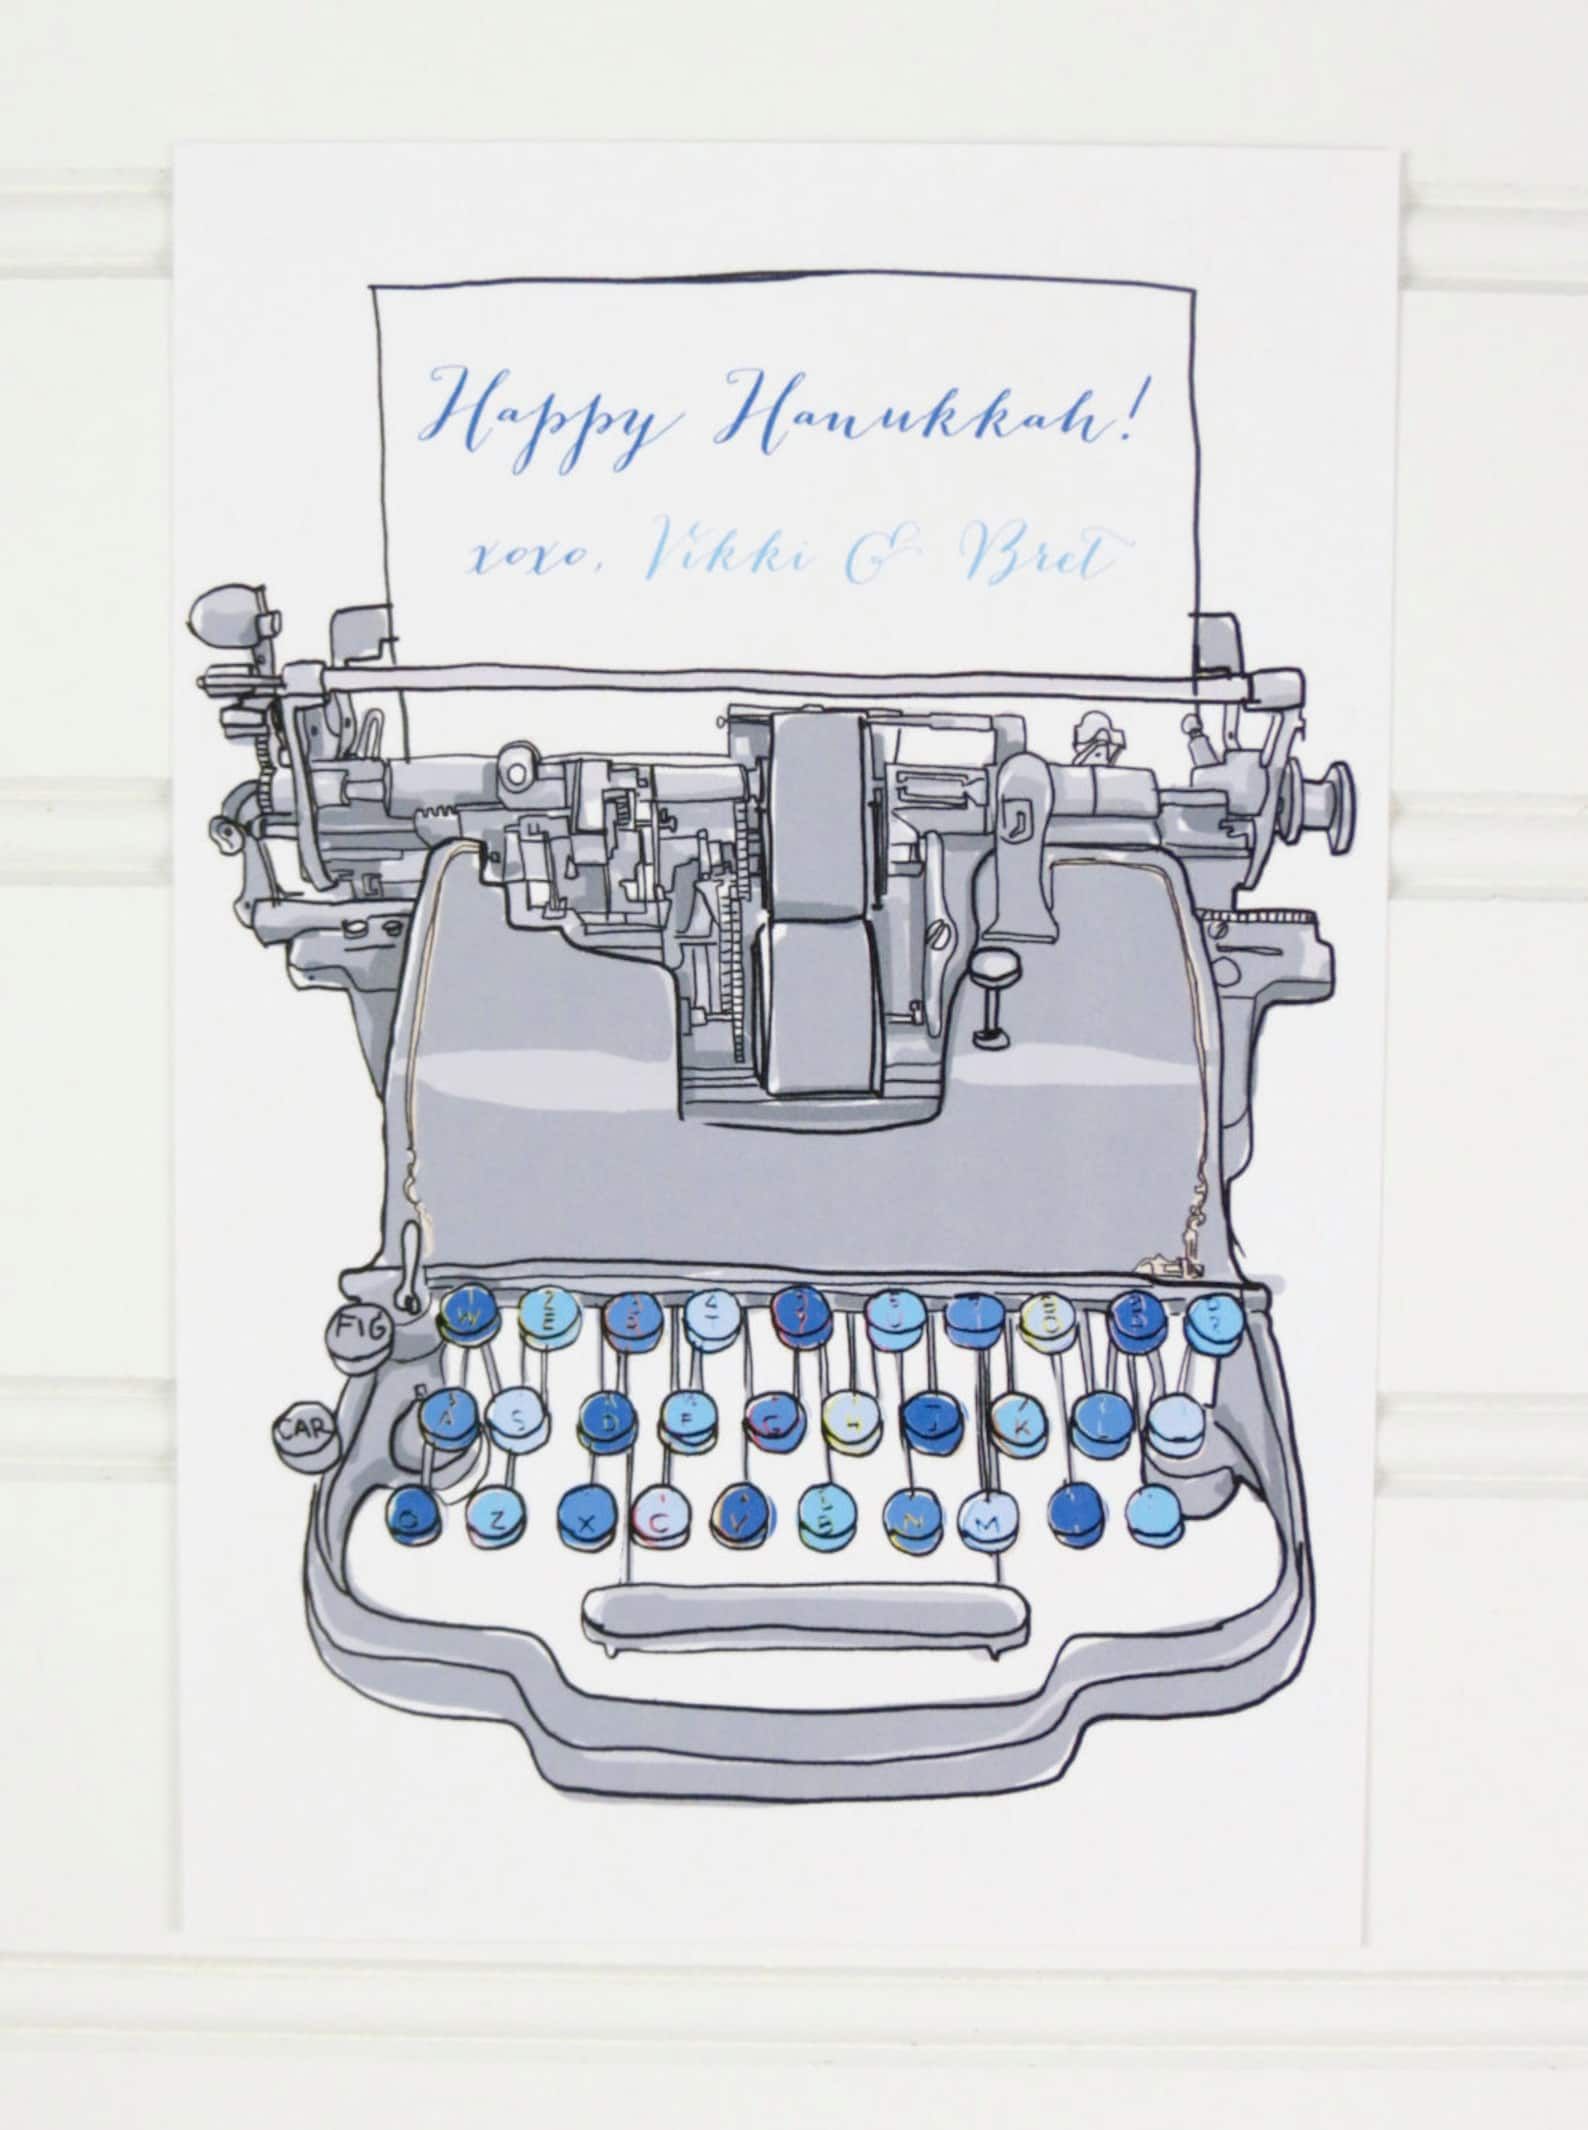 A vintage blue typewriter typing out "Happy Hanukkah" with space for a personalized message on a white postcard